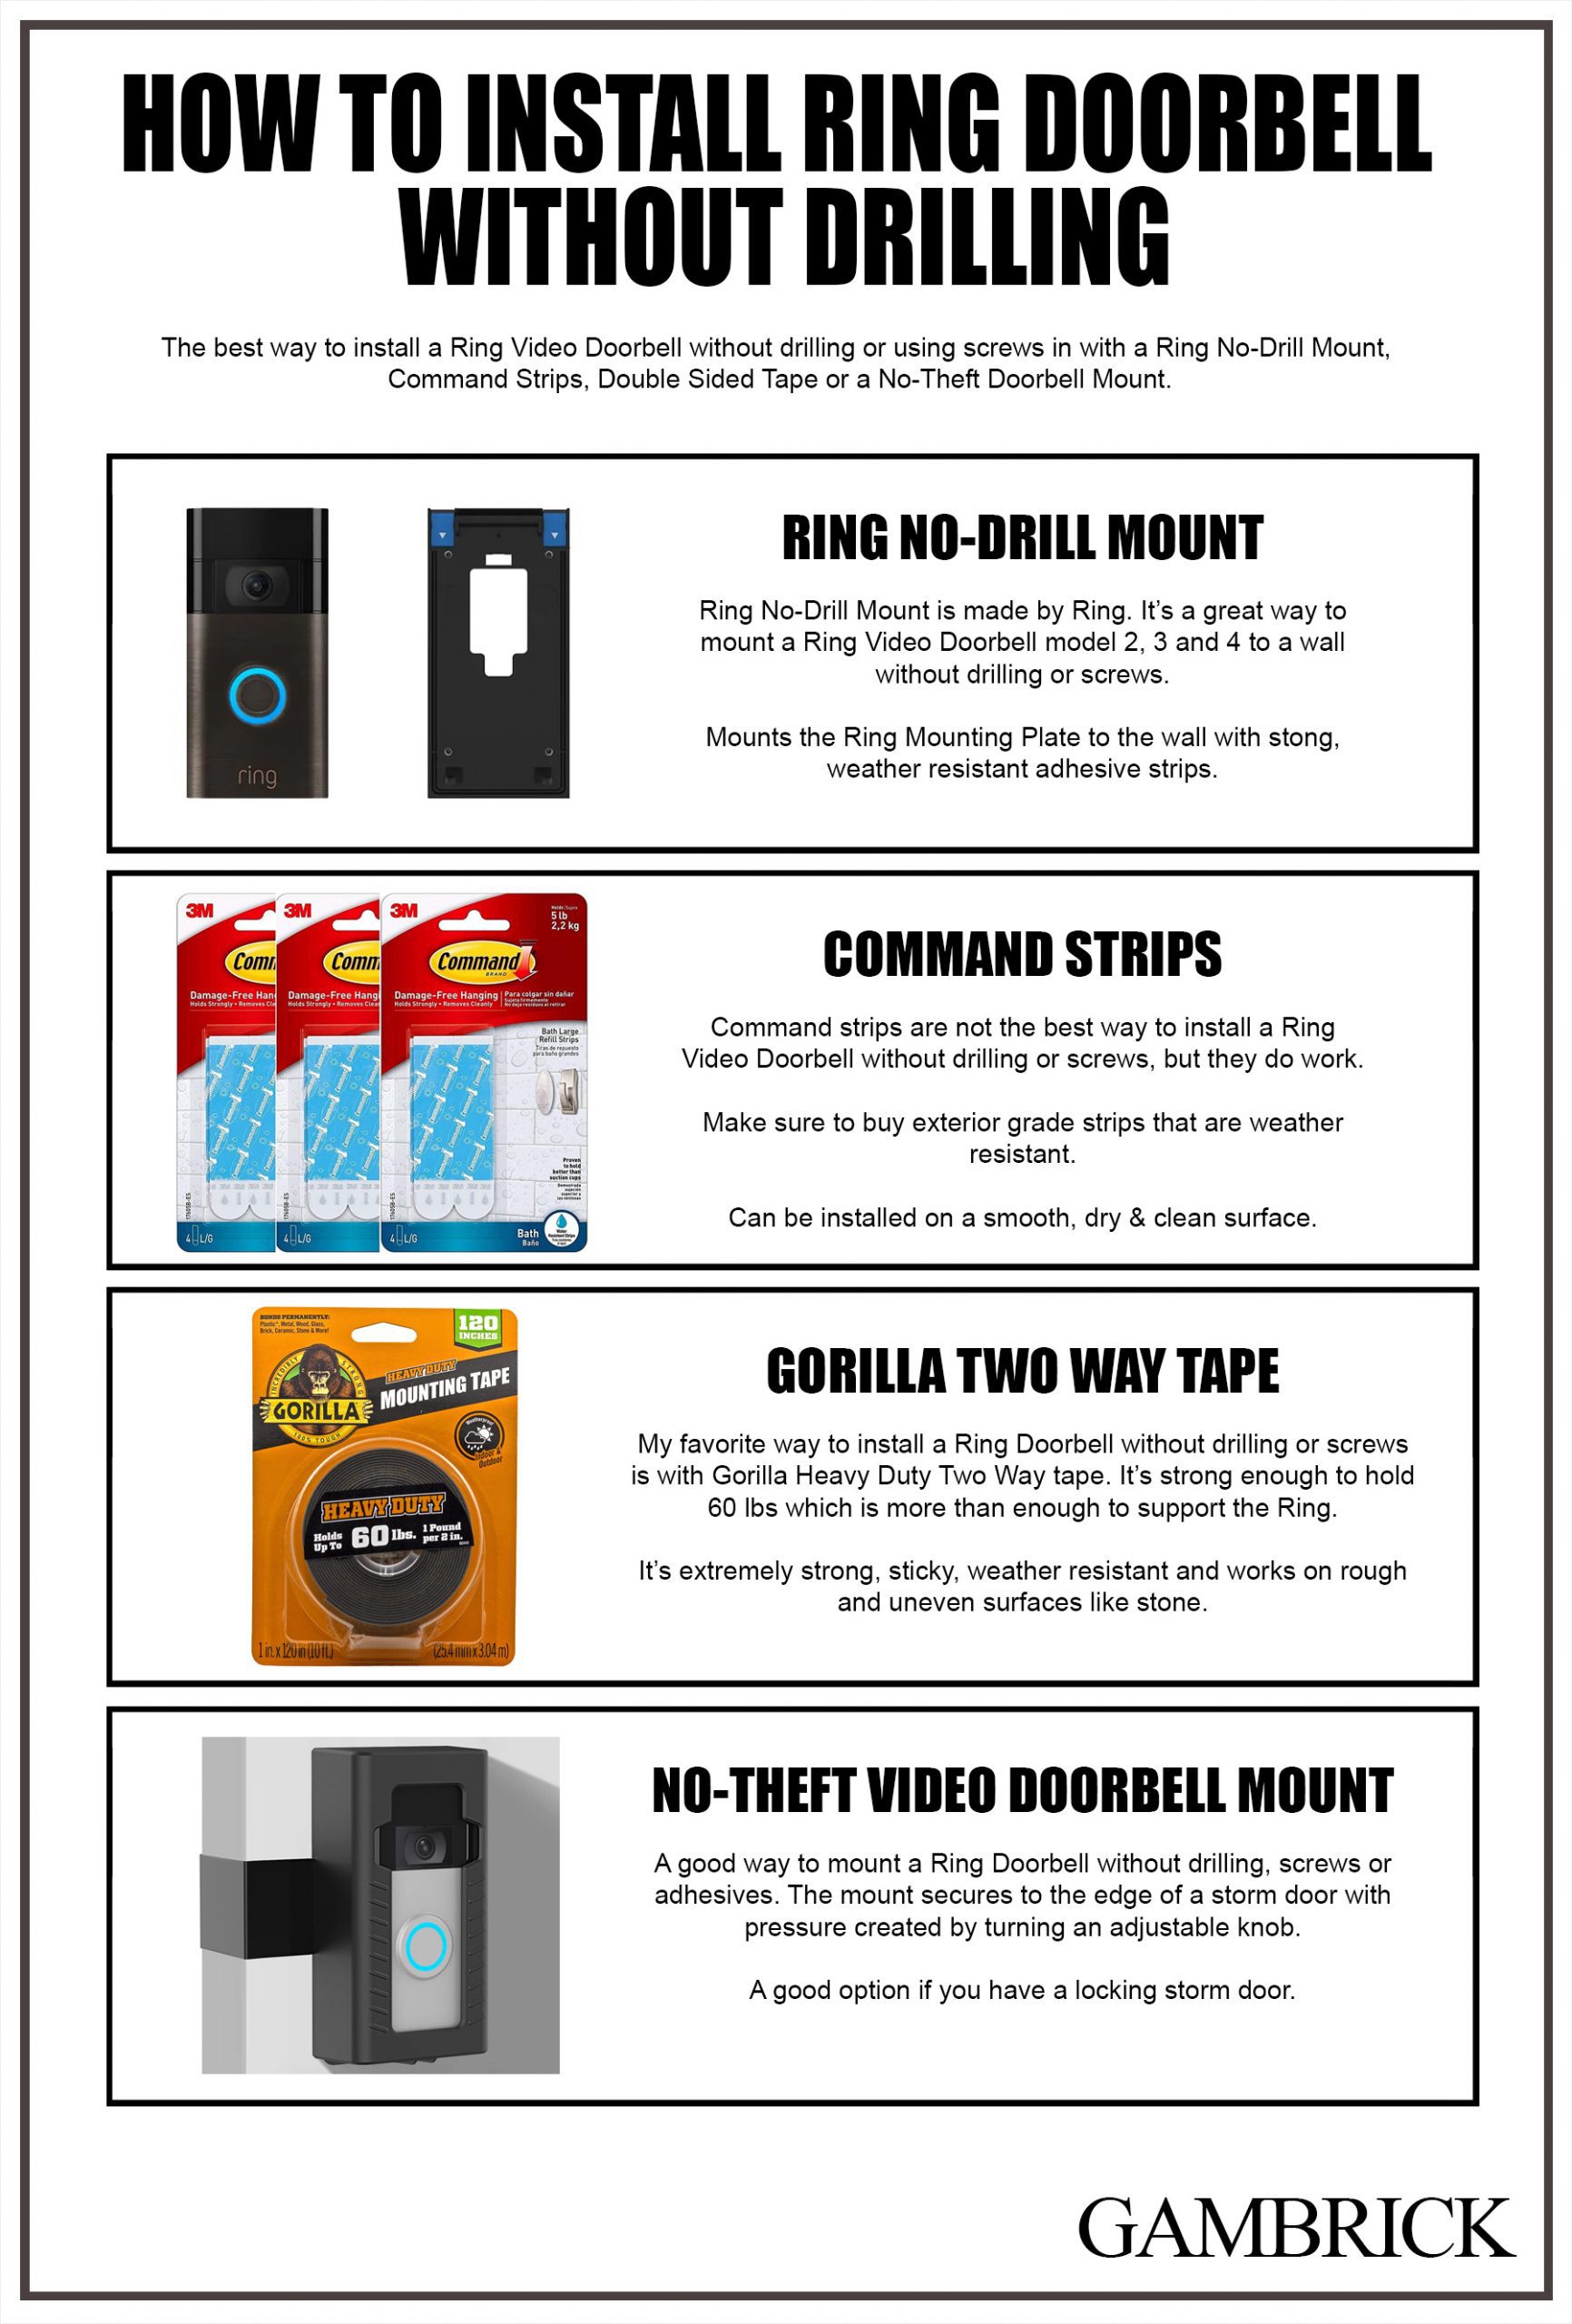 can you install ring doorbell without drilling infographic 1.0